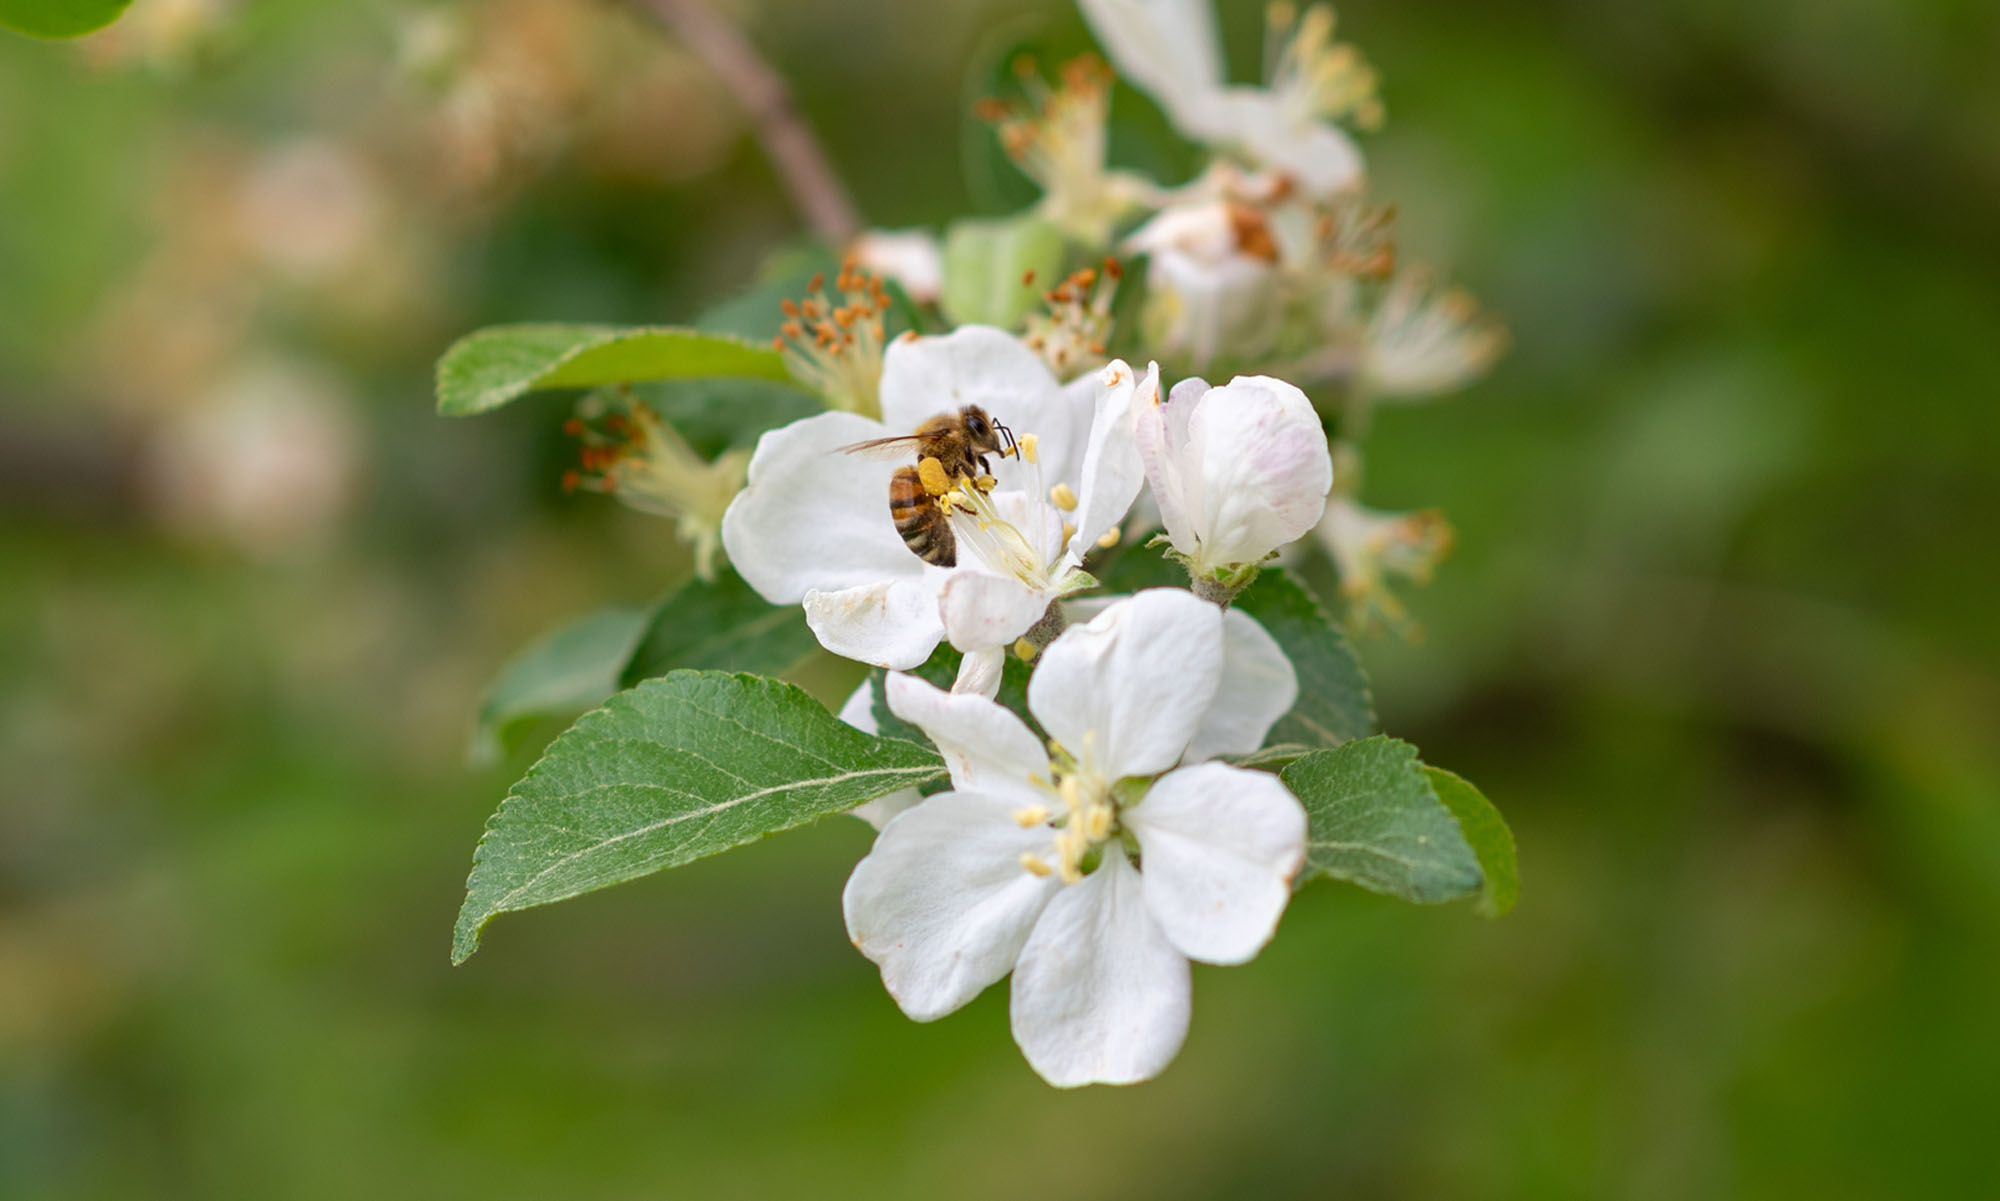 A honey bee collecting pollen and nectar from an apple tree flower.